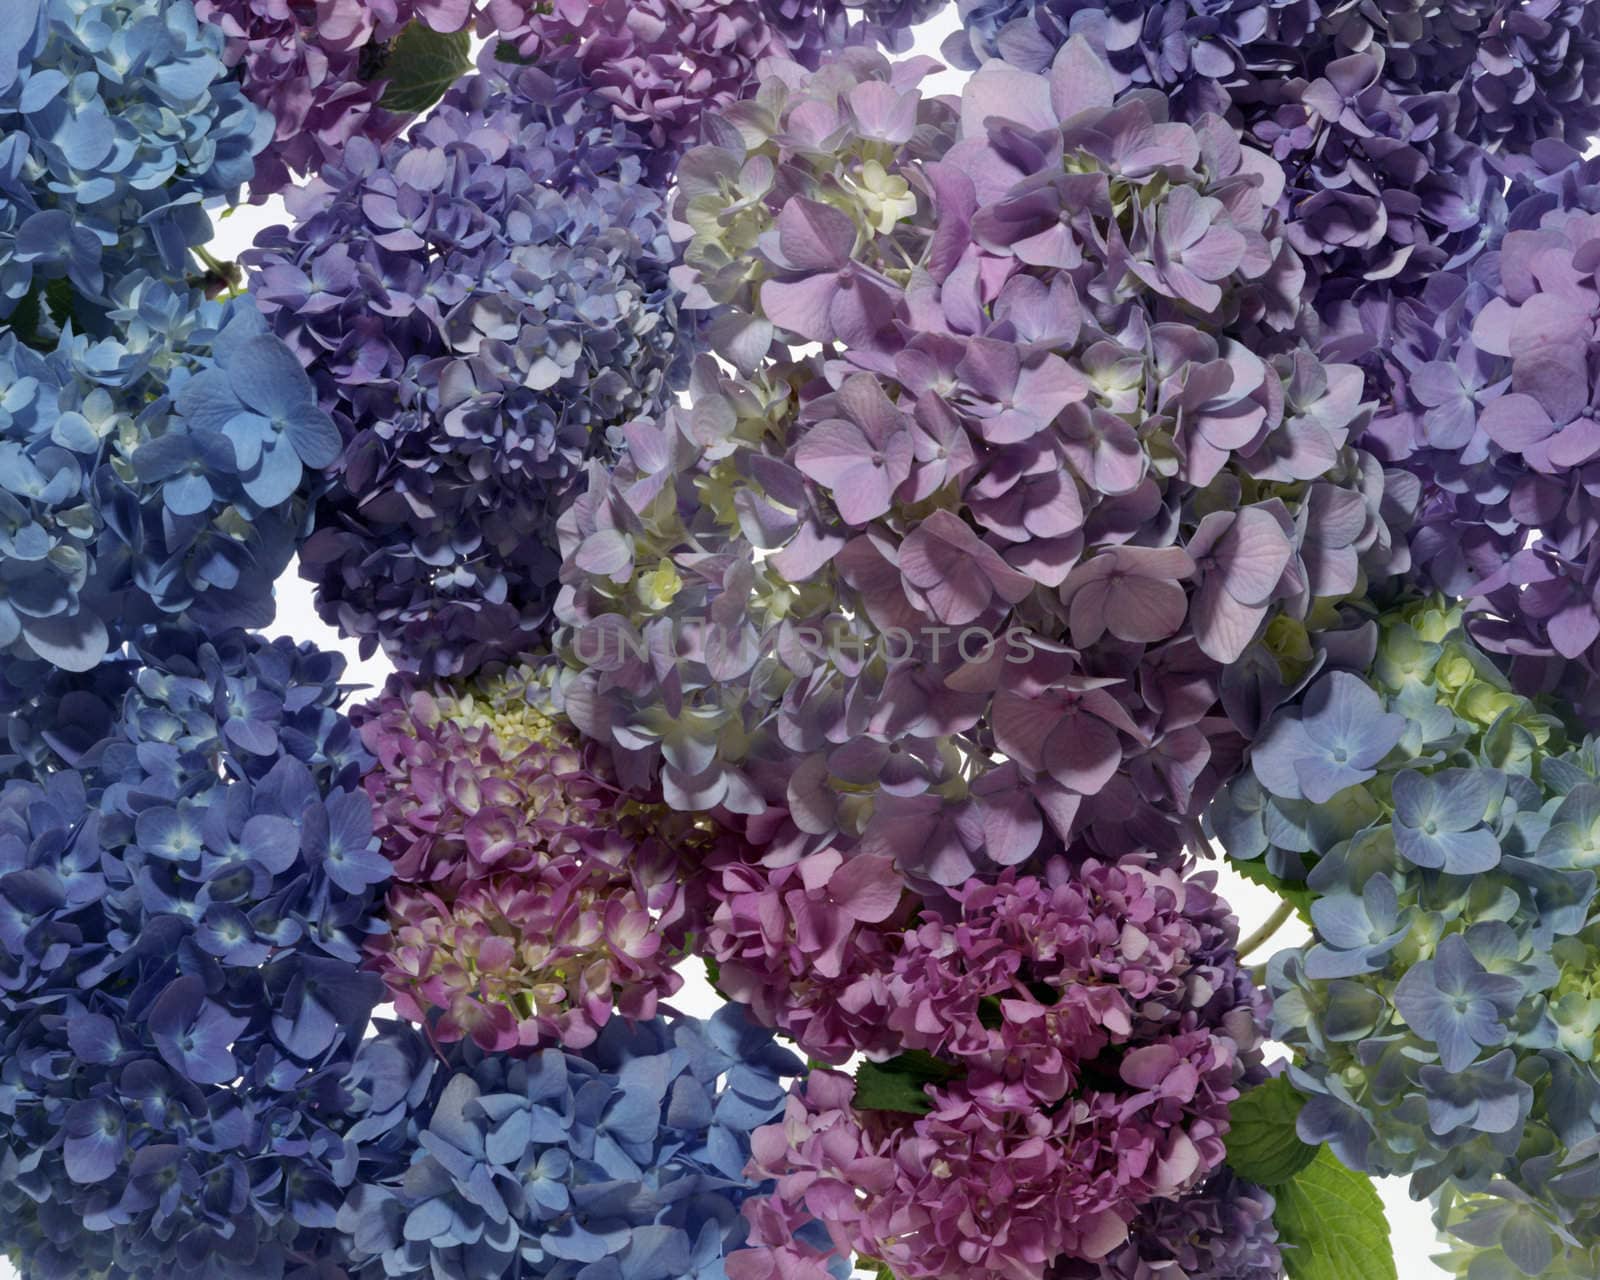 Hydrangea Collage  by DirkWestphal